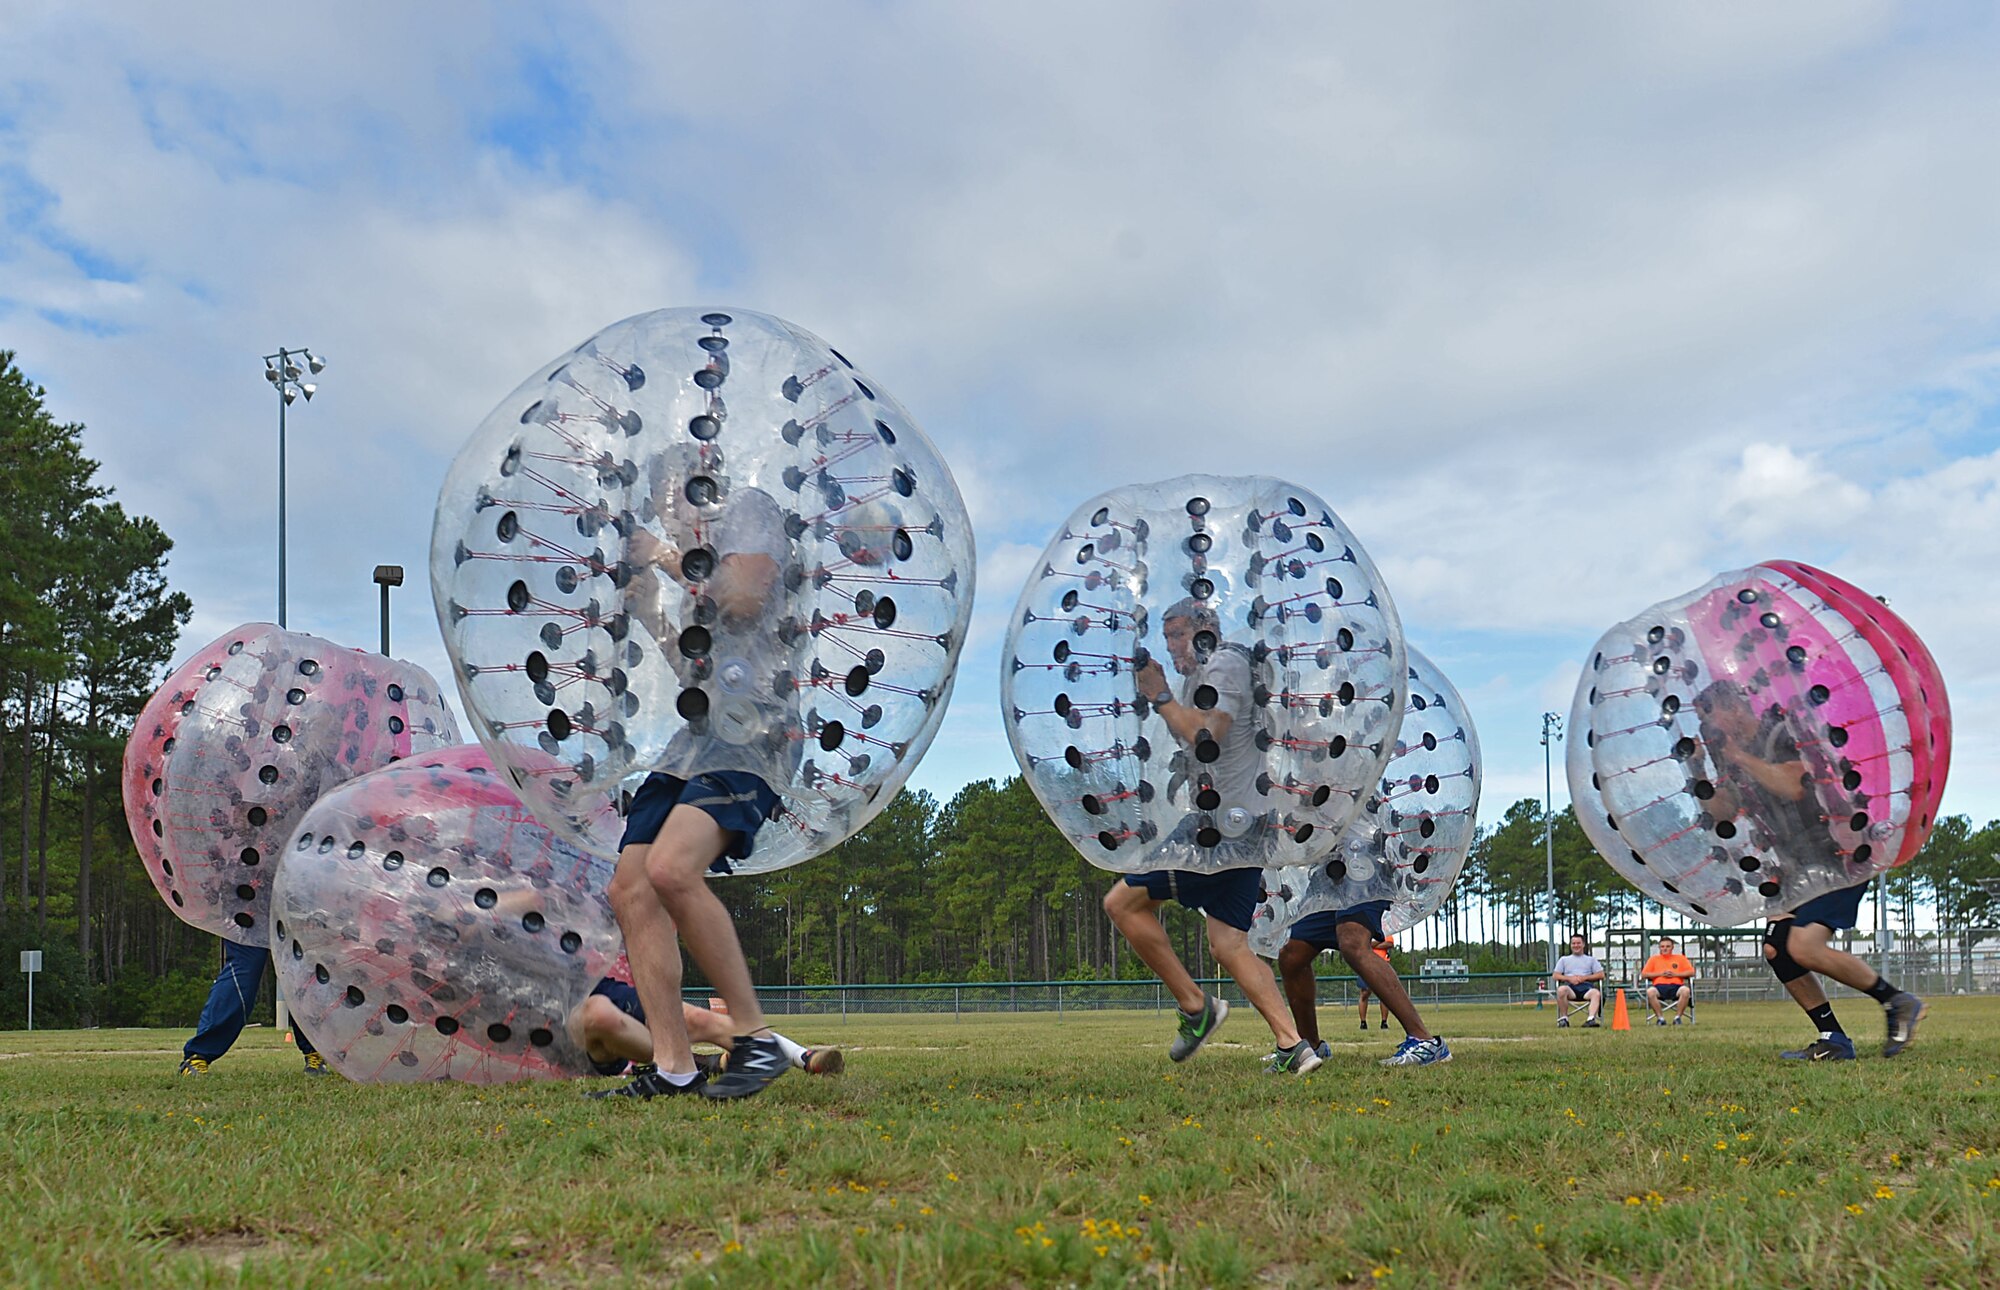 U.S. Airmen assigned to the 20th Fighter Wing play knockerball during a Comprehensive Airman Fitness sports day at Shaw Air Force Base, S.C., Aug. 10, 2016. Airmen competed in teams of five to score points, as well as strengthen relationships with other members of the 20th FW. (U.S. Air Force photo by Airman 1st Class Christopher Maldonado)